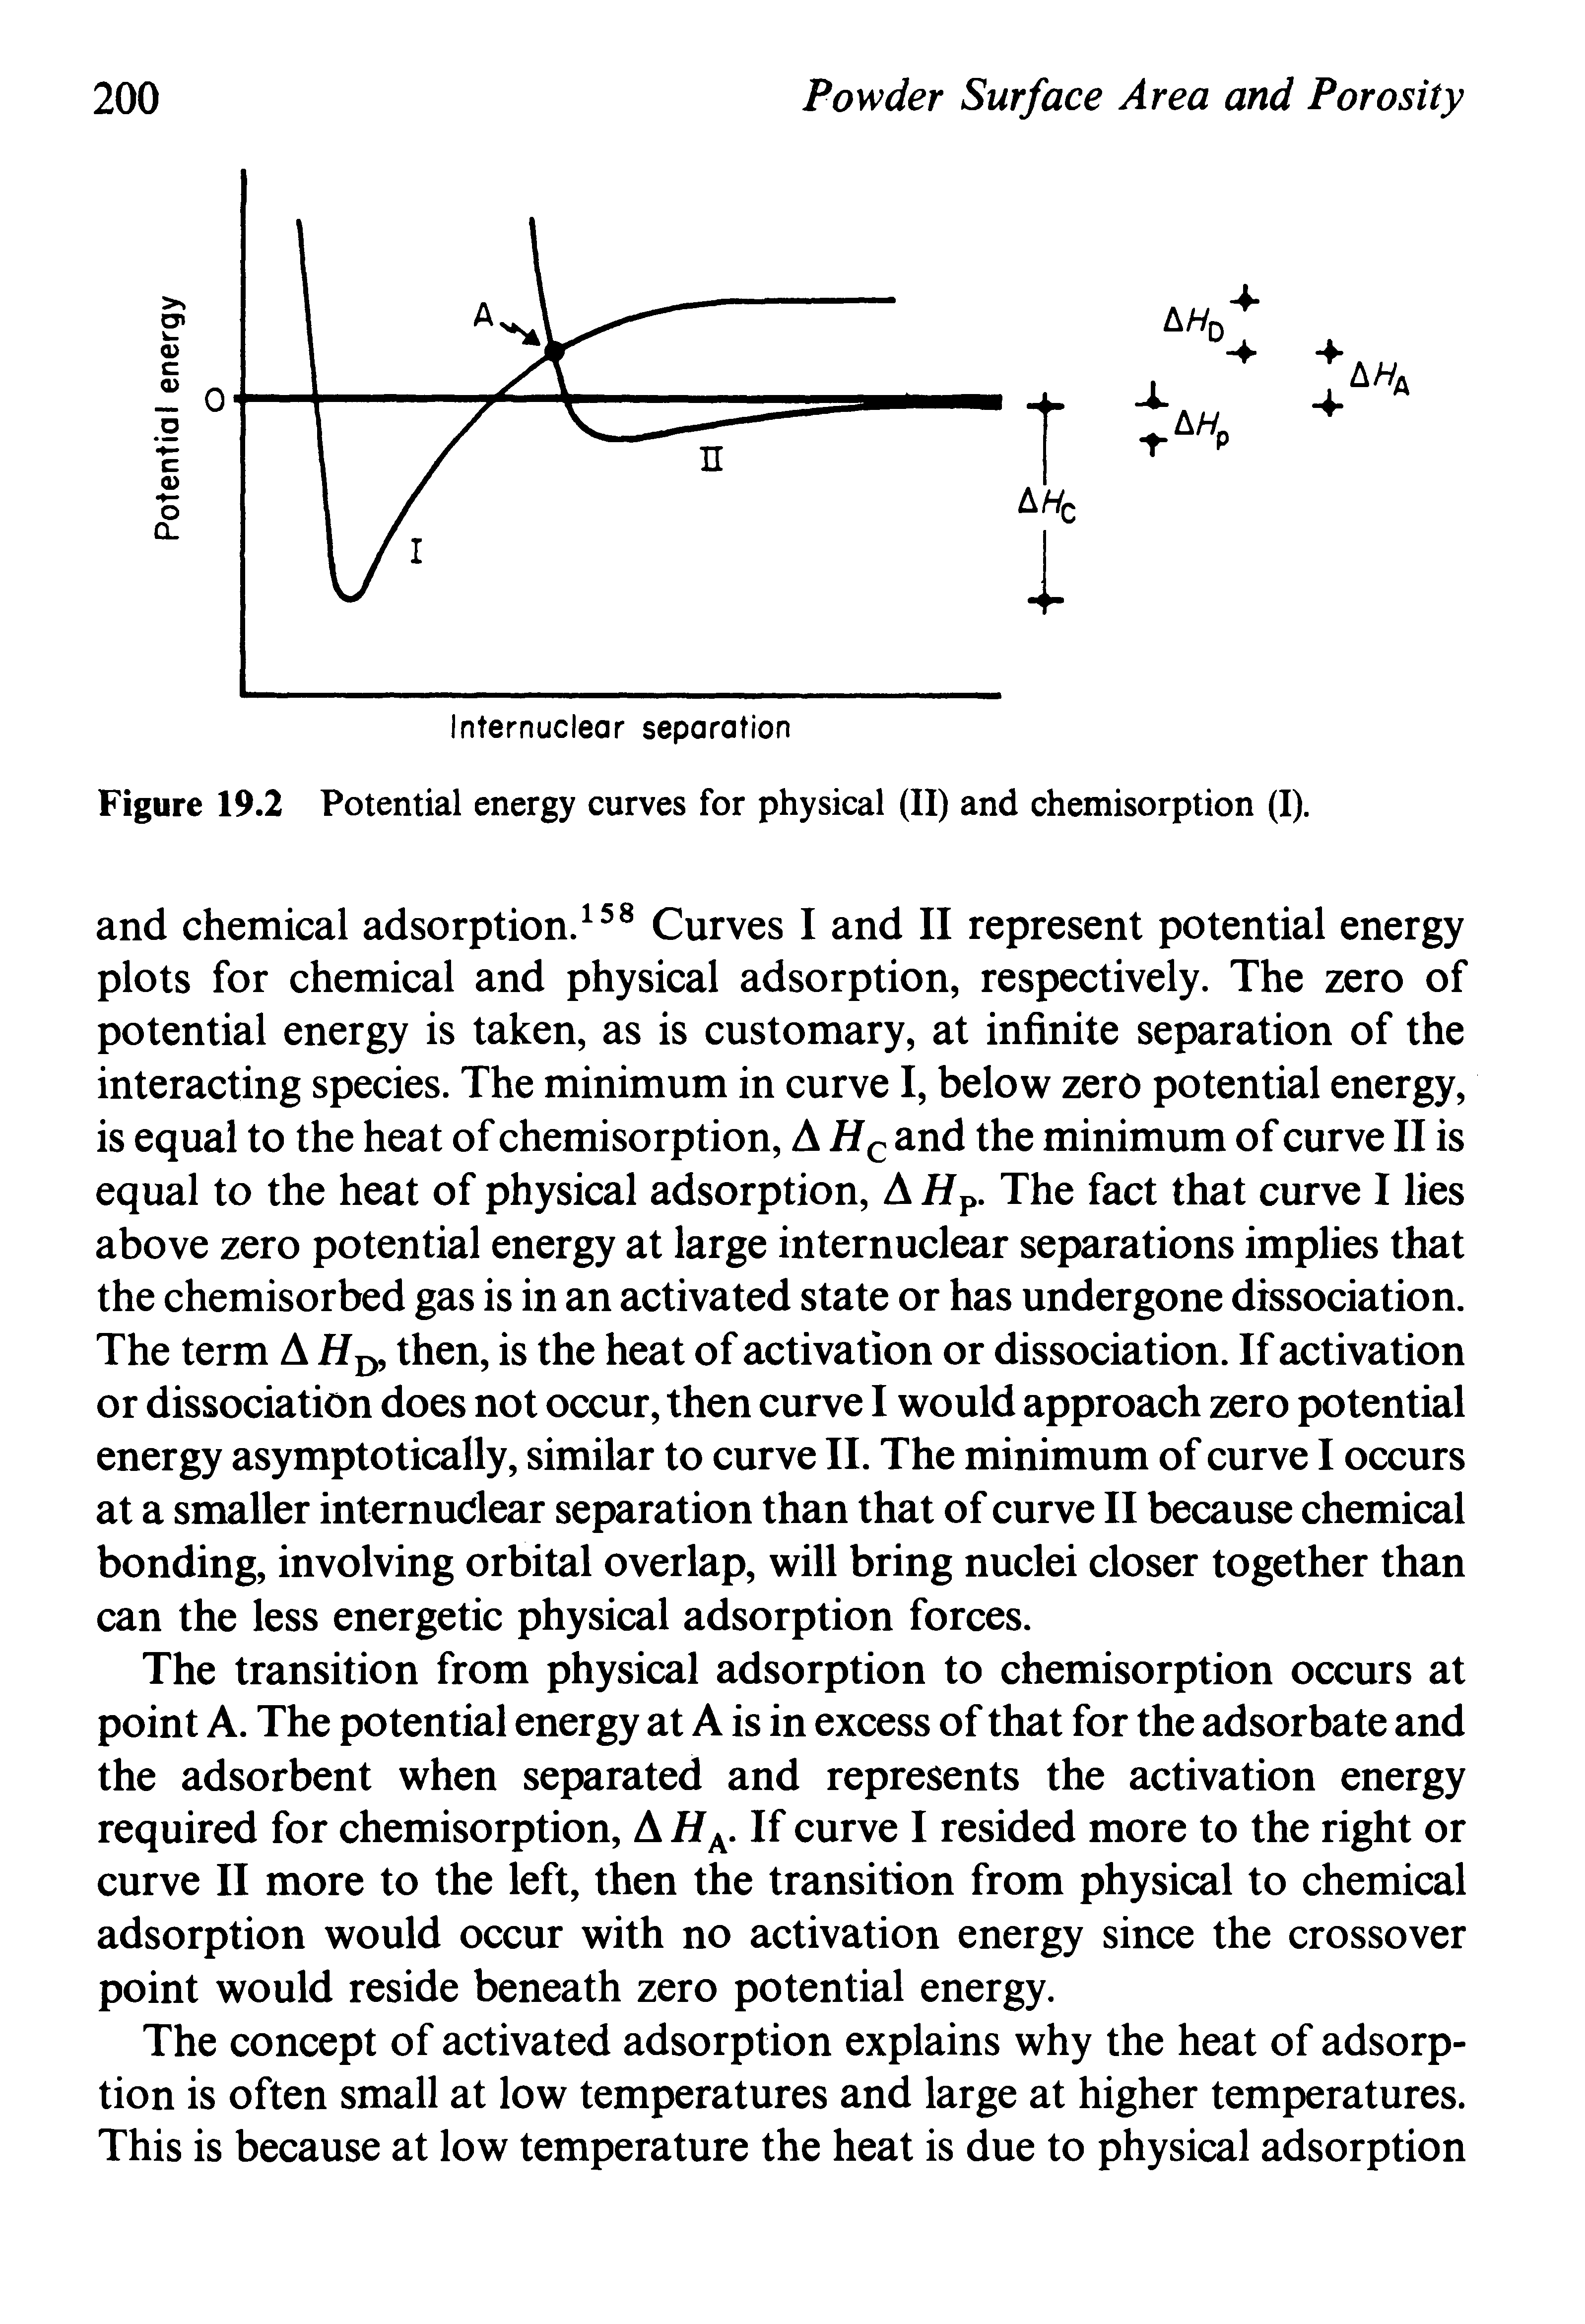 Figure 19.2 Potential energy curves for physical (II) and chemisorption (I).